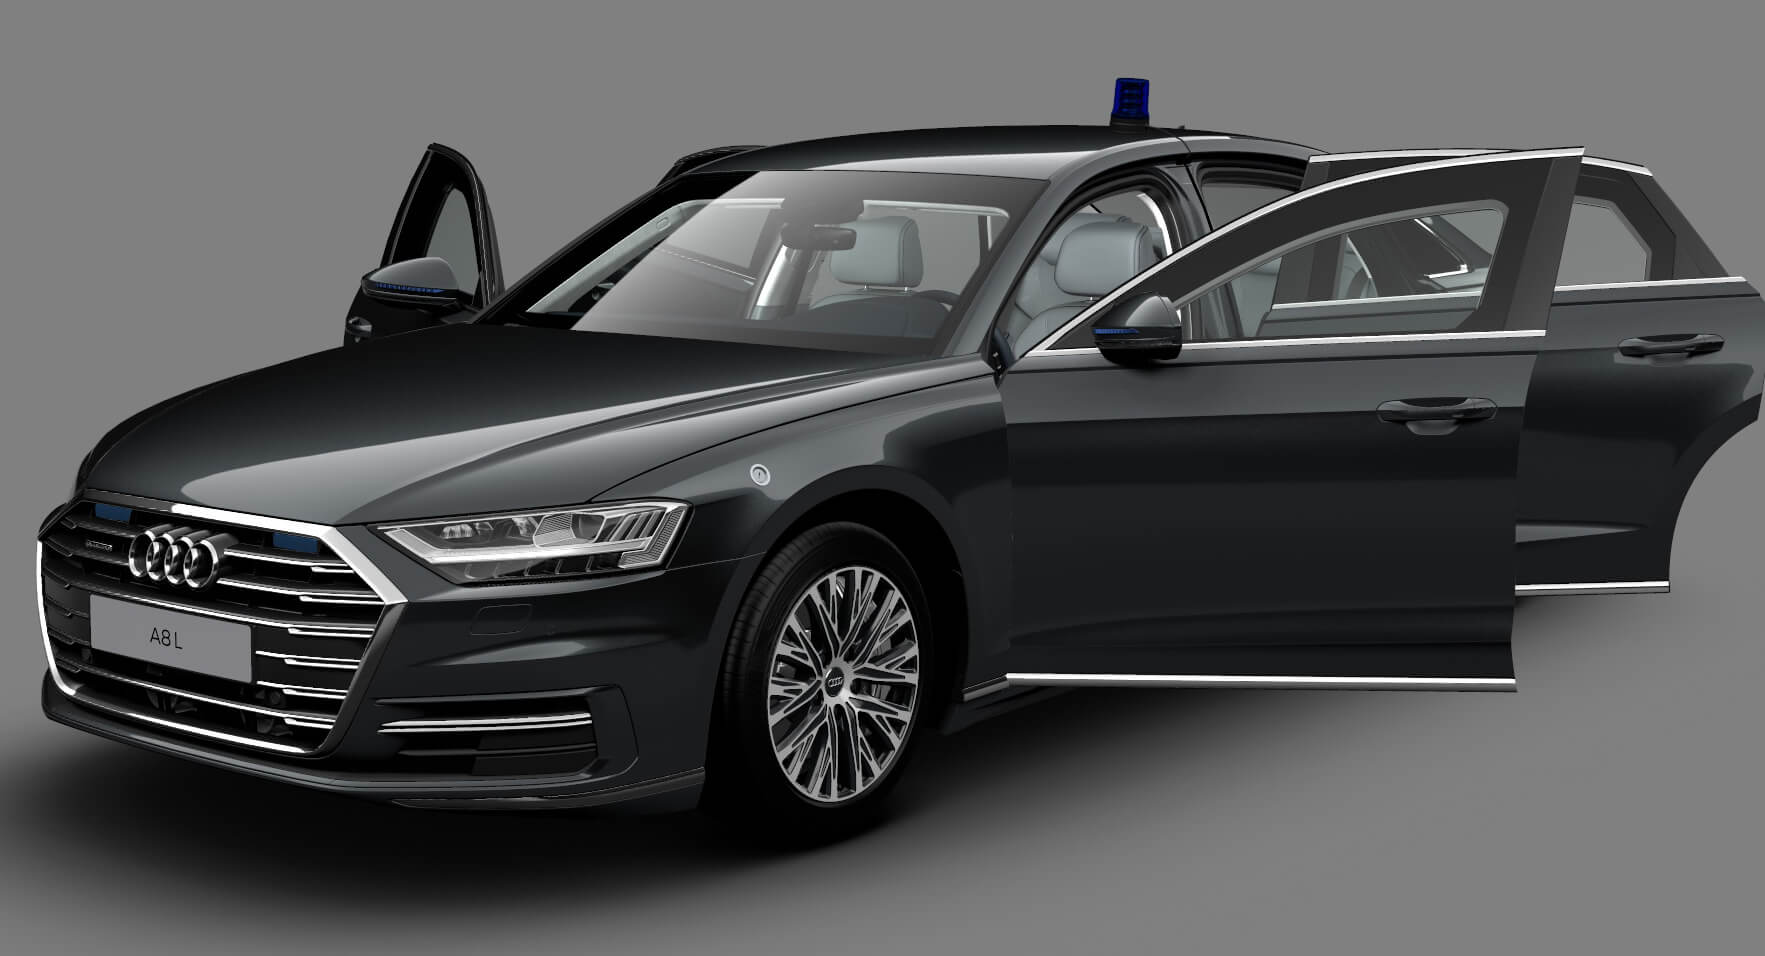 2020 Audi A8 L Security Is An S8-Powered Armored Limo That Costs Almost  $750K | Carscoops